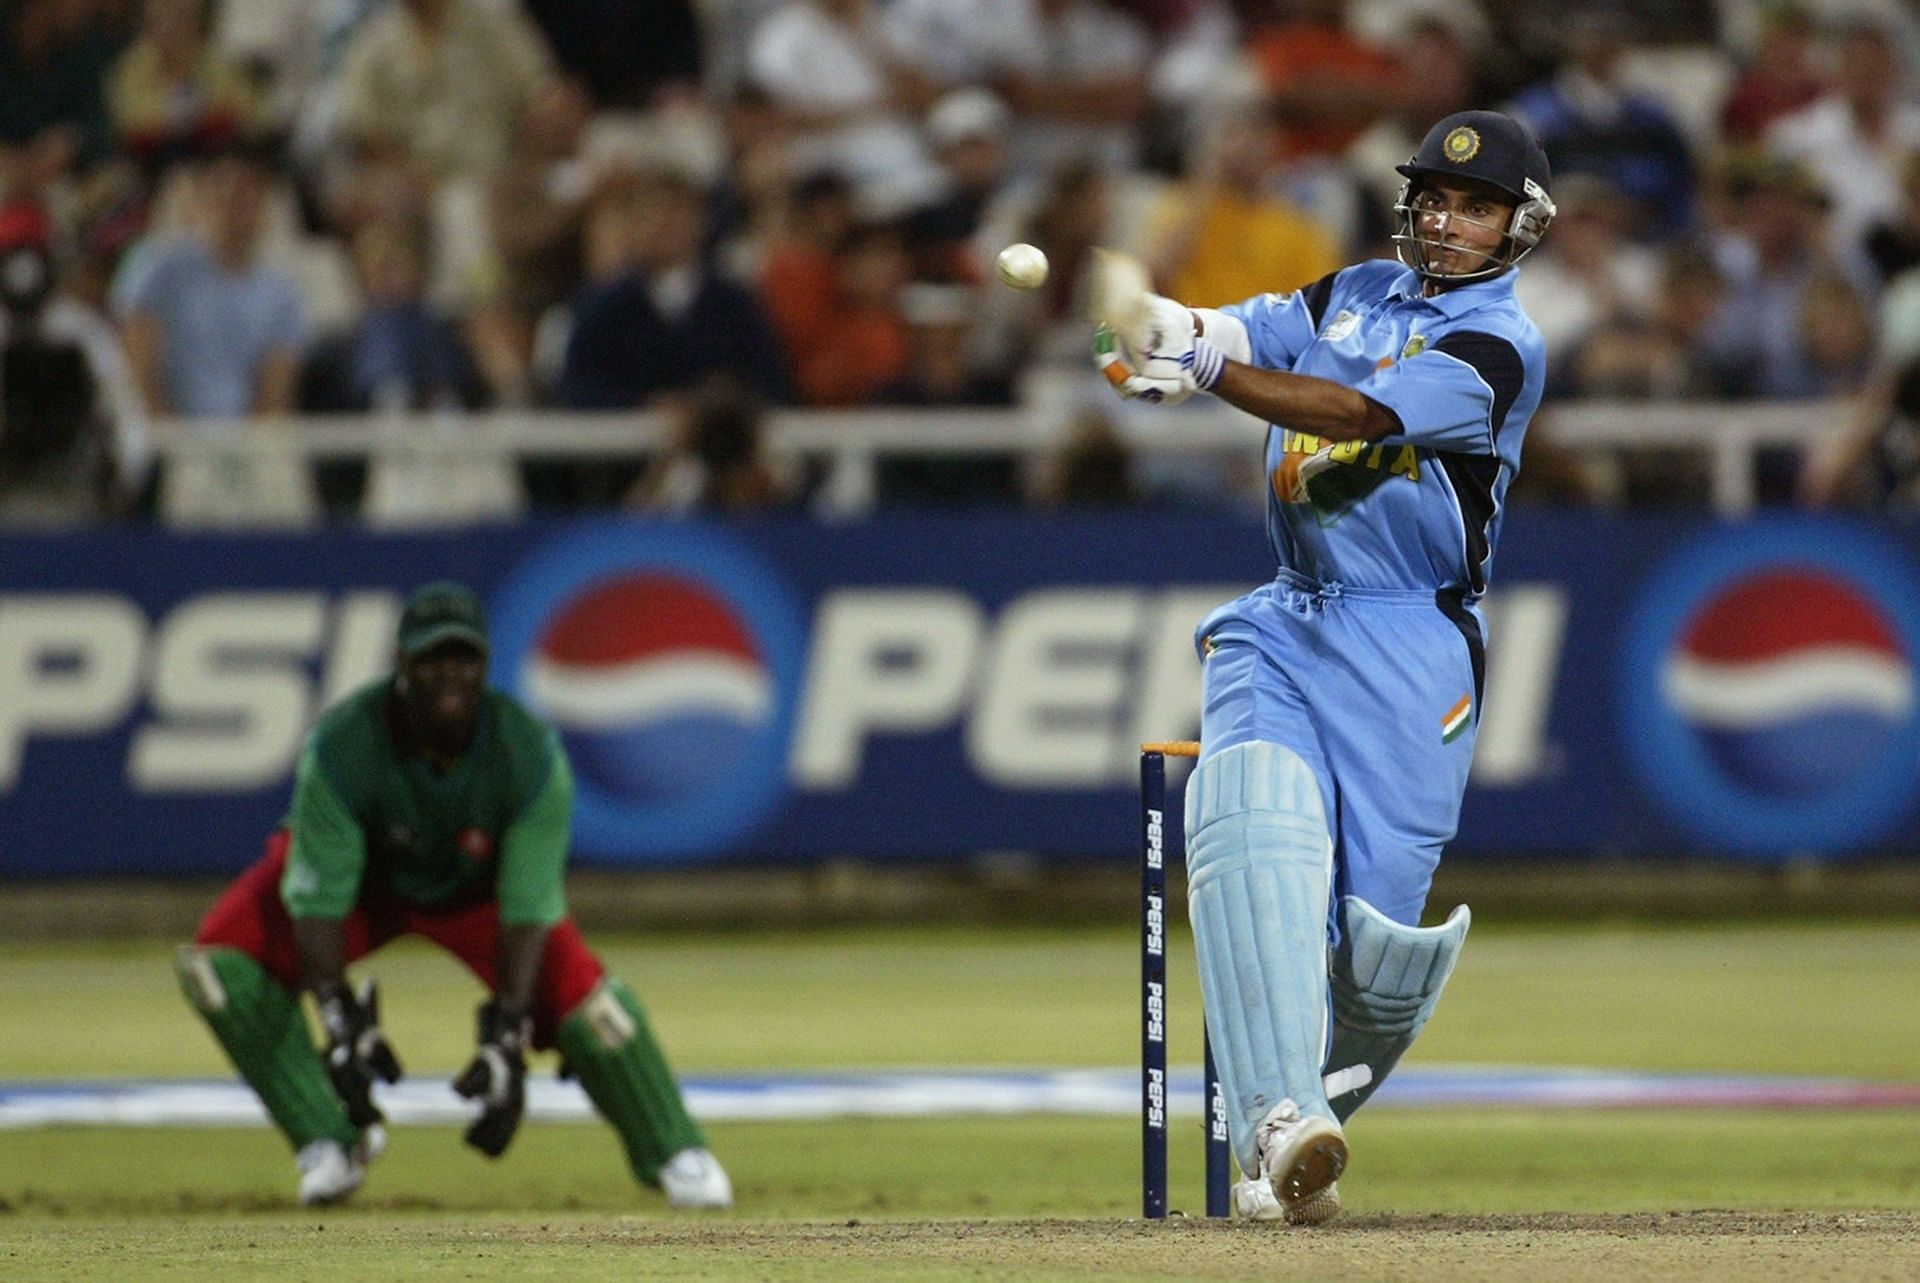 Sourav Ganguly batting during the 2003 World Cup. (Pic: Getty Images)